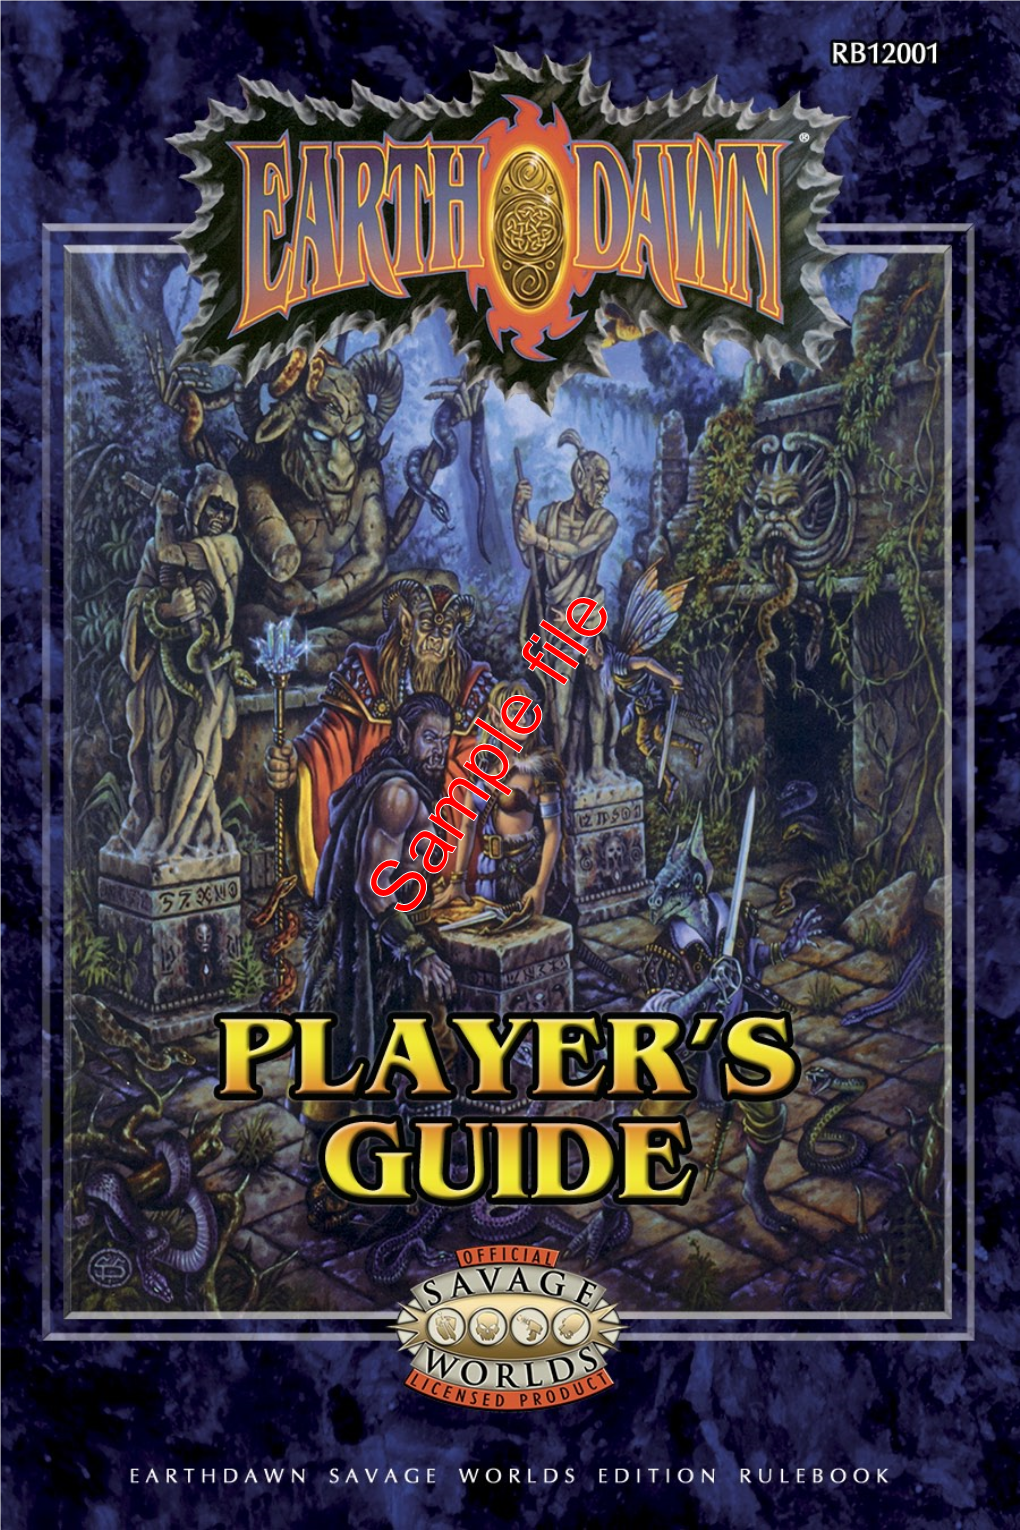 Earthdawn Player's Guide